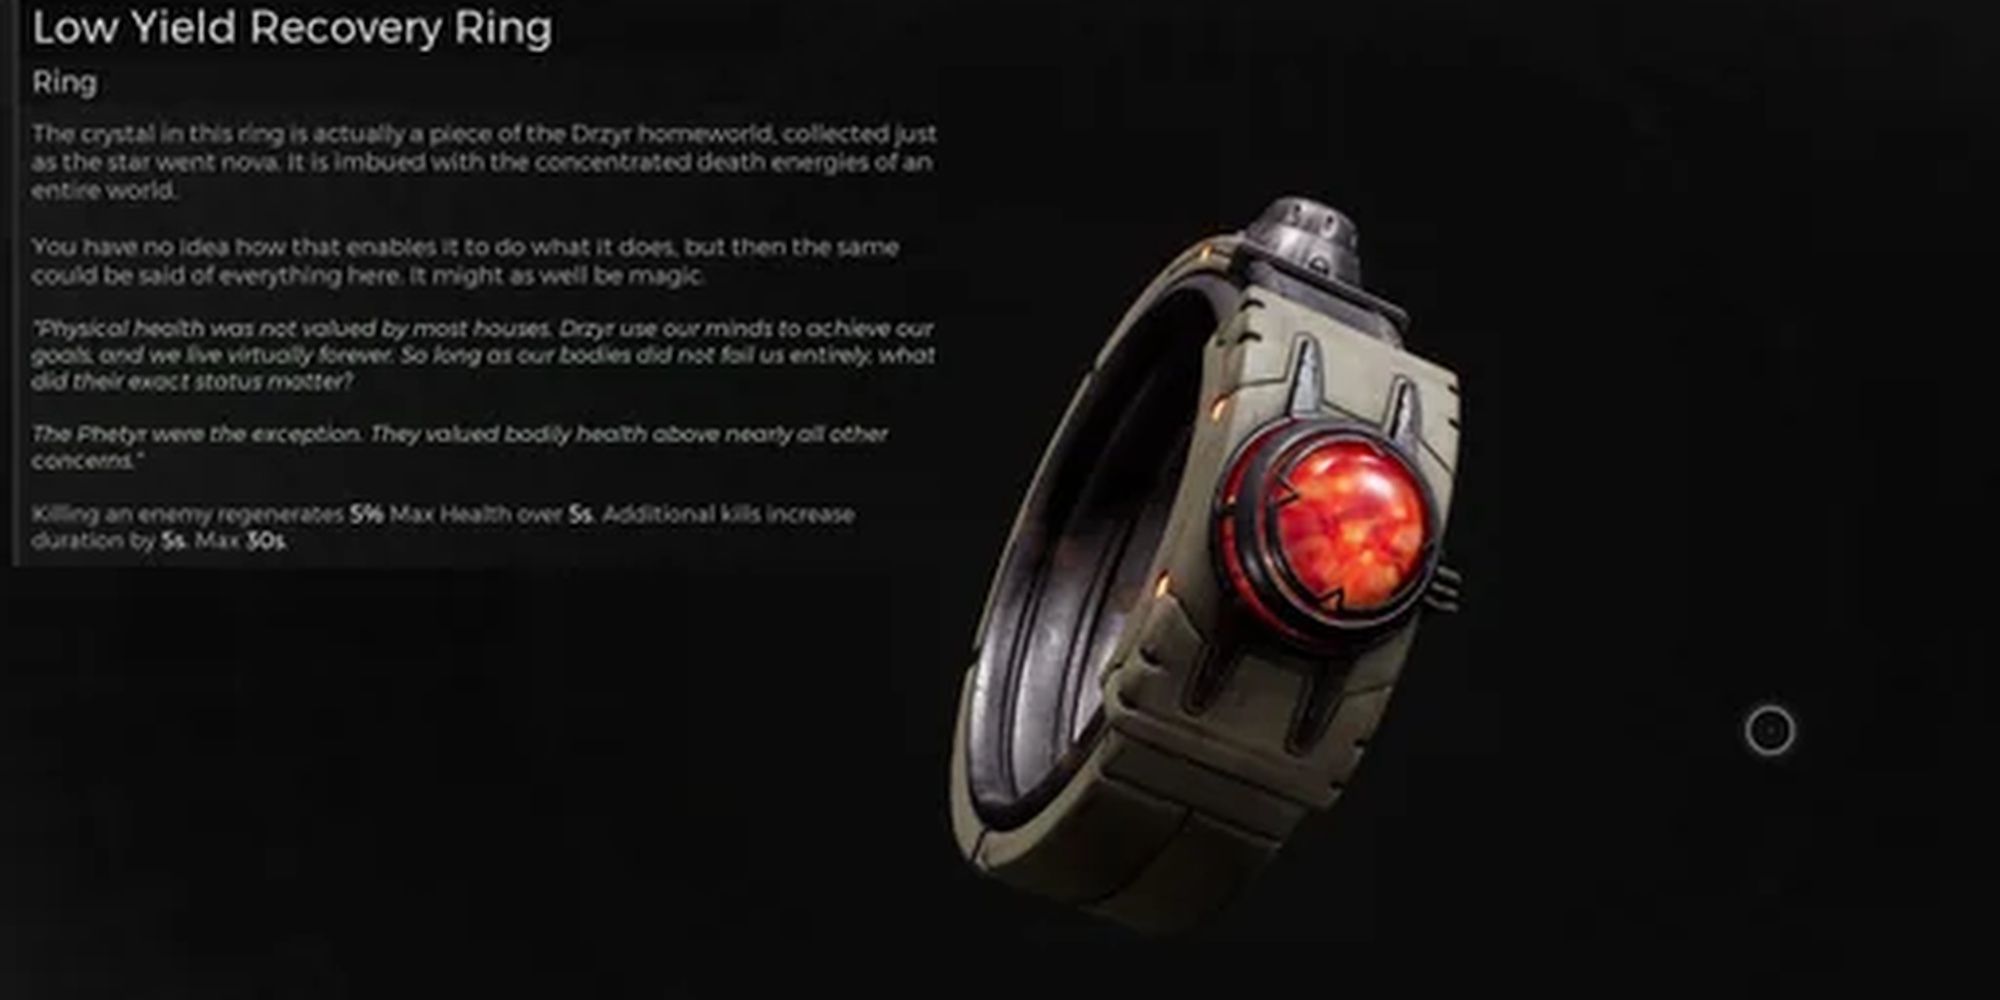 Remnant 2: The Low Yield Recovery Ring Item Description